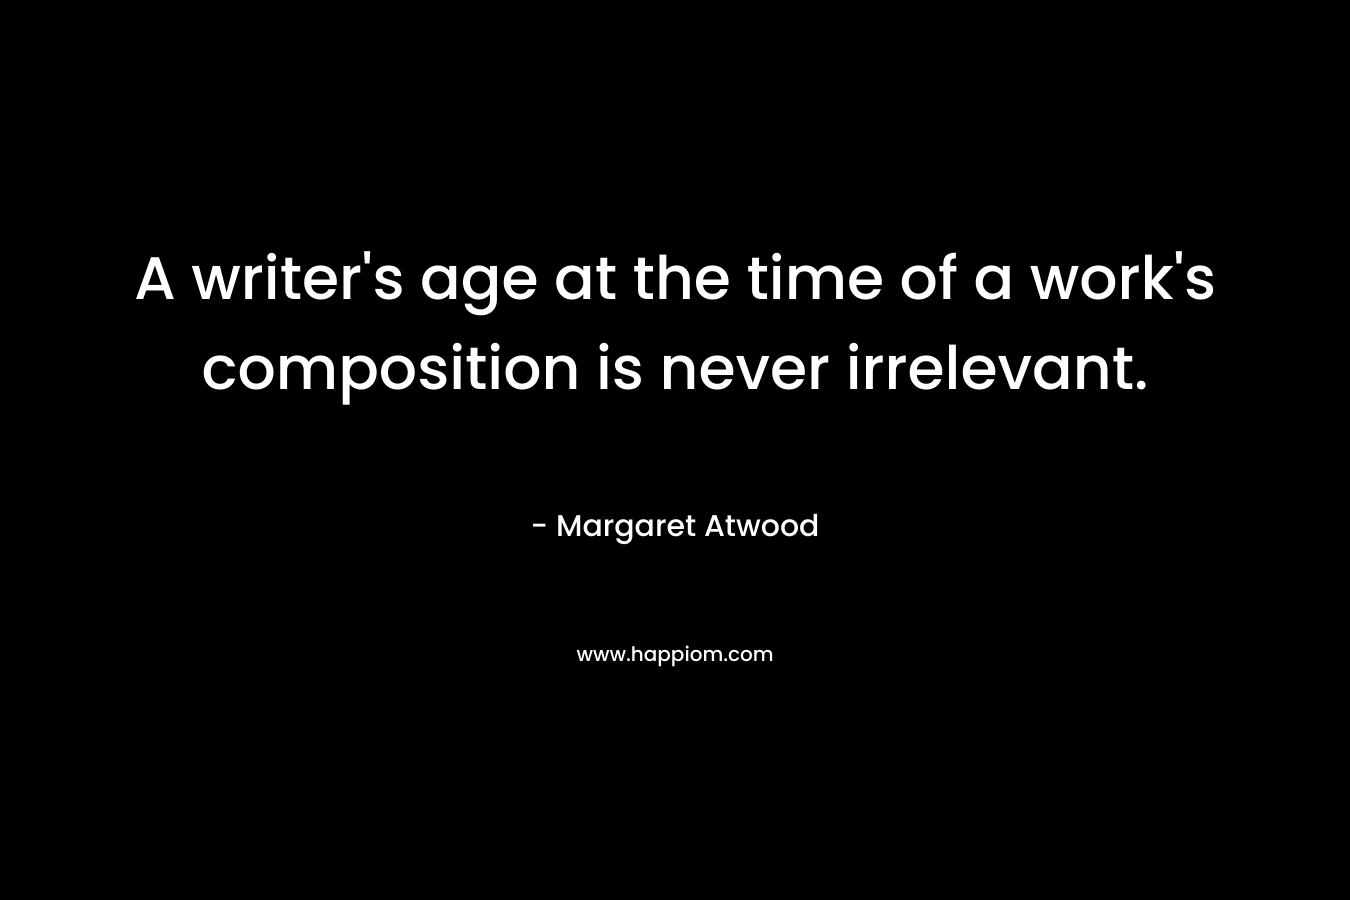 A writer’s age at the time of a work’s composition is never irrelevant. – Margaret Atwood